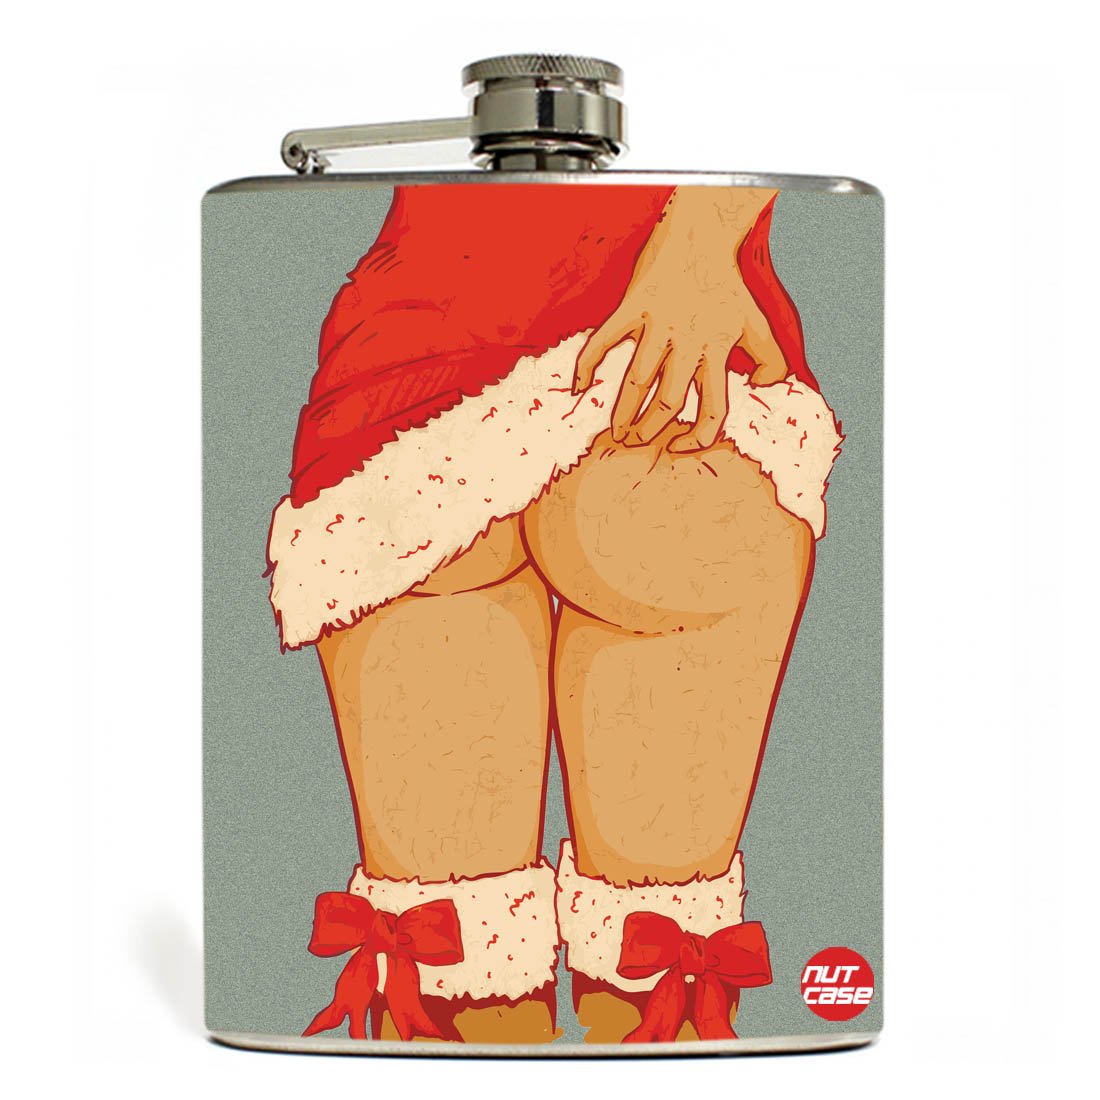 Personalized Christmas Gift Box Hip Flask Whisky Glass Funny Secret Santa Gifts